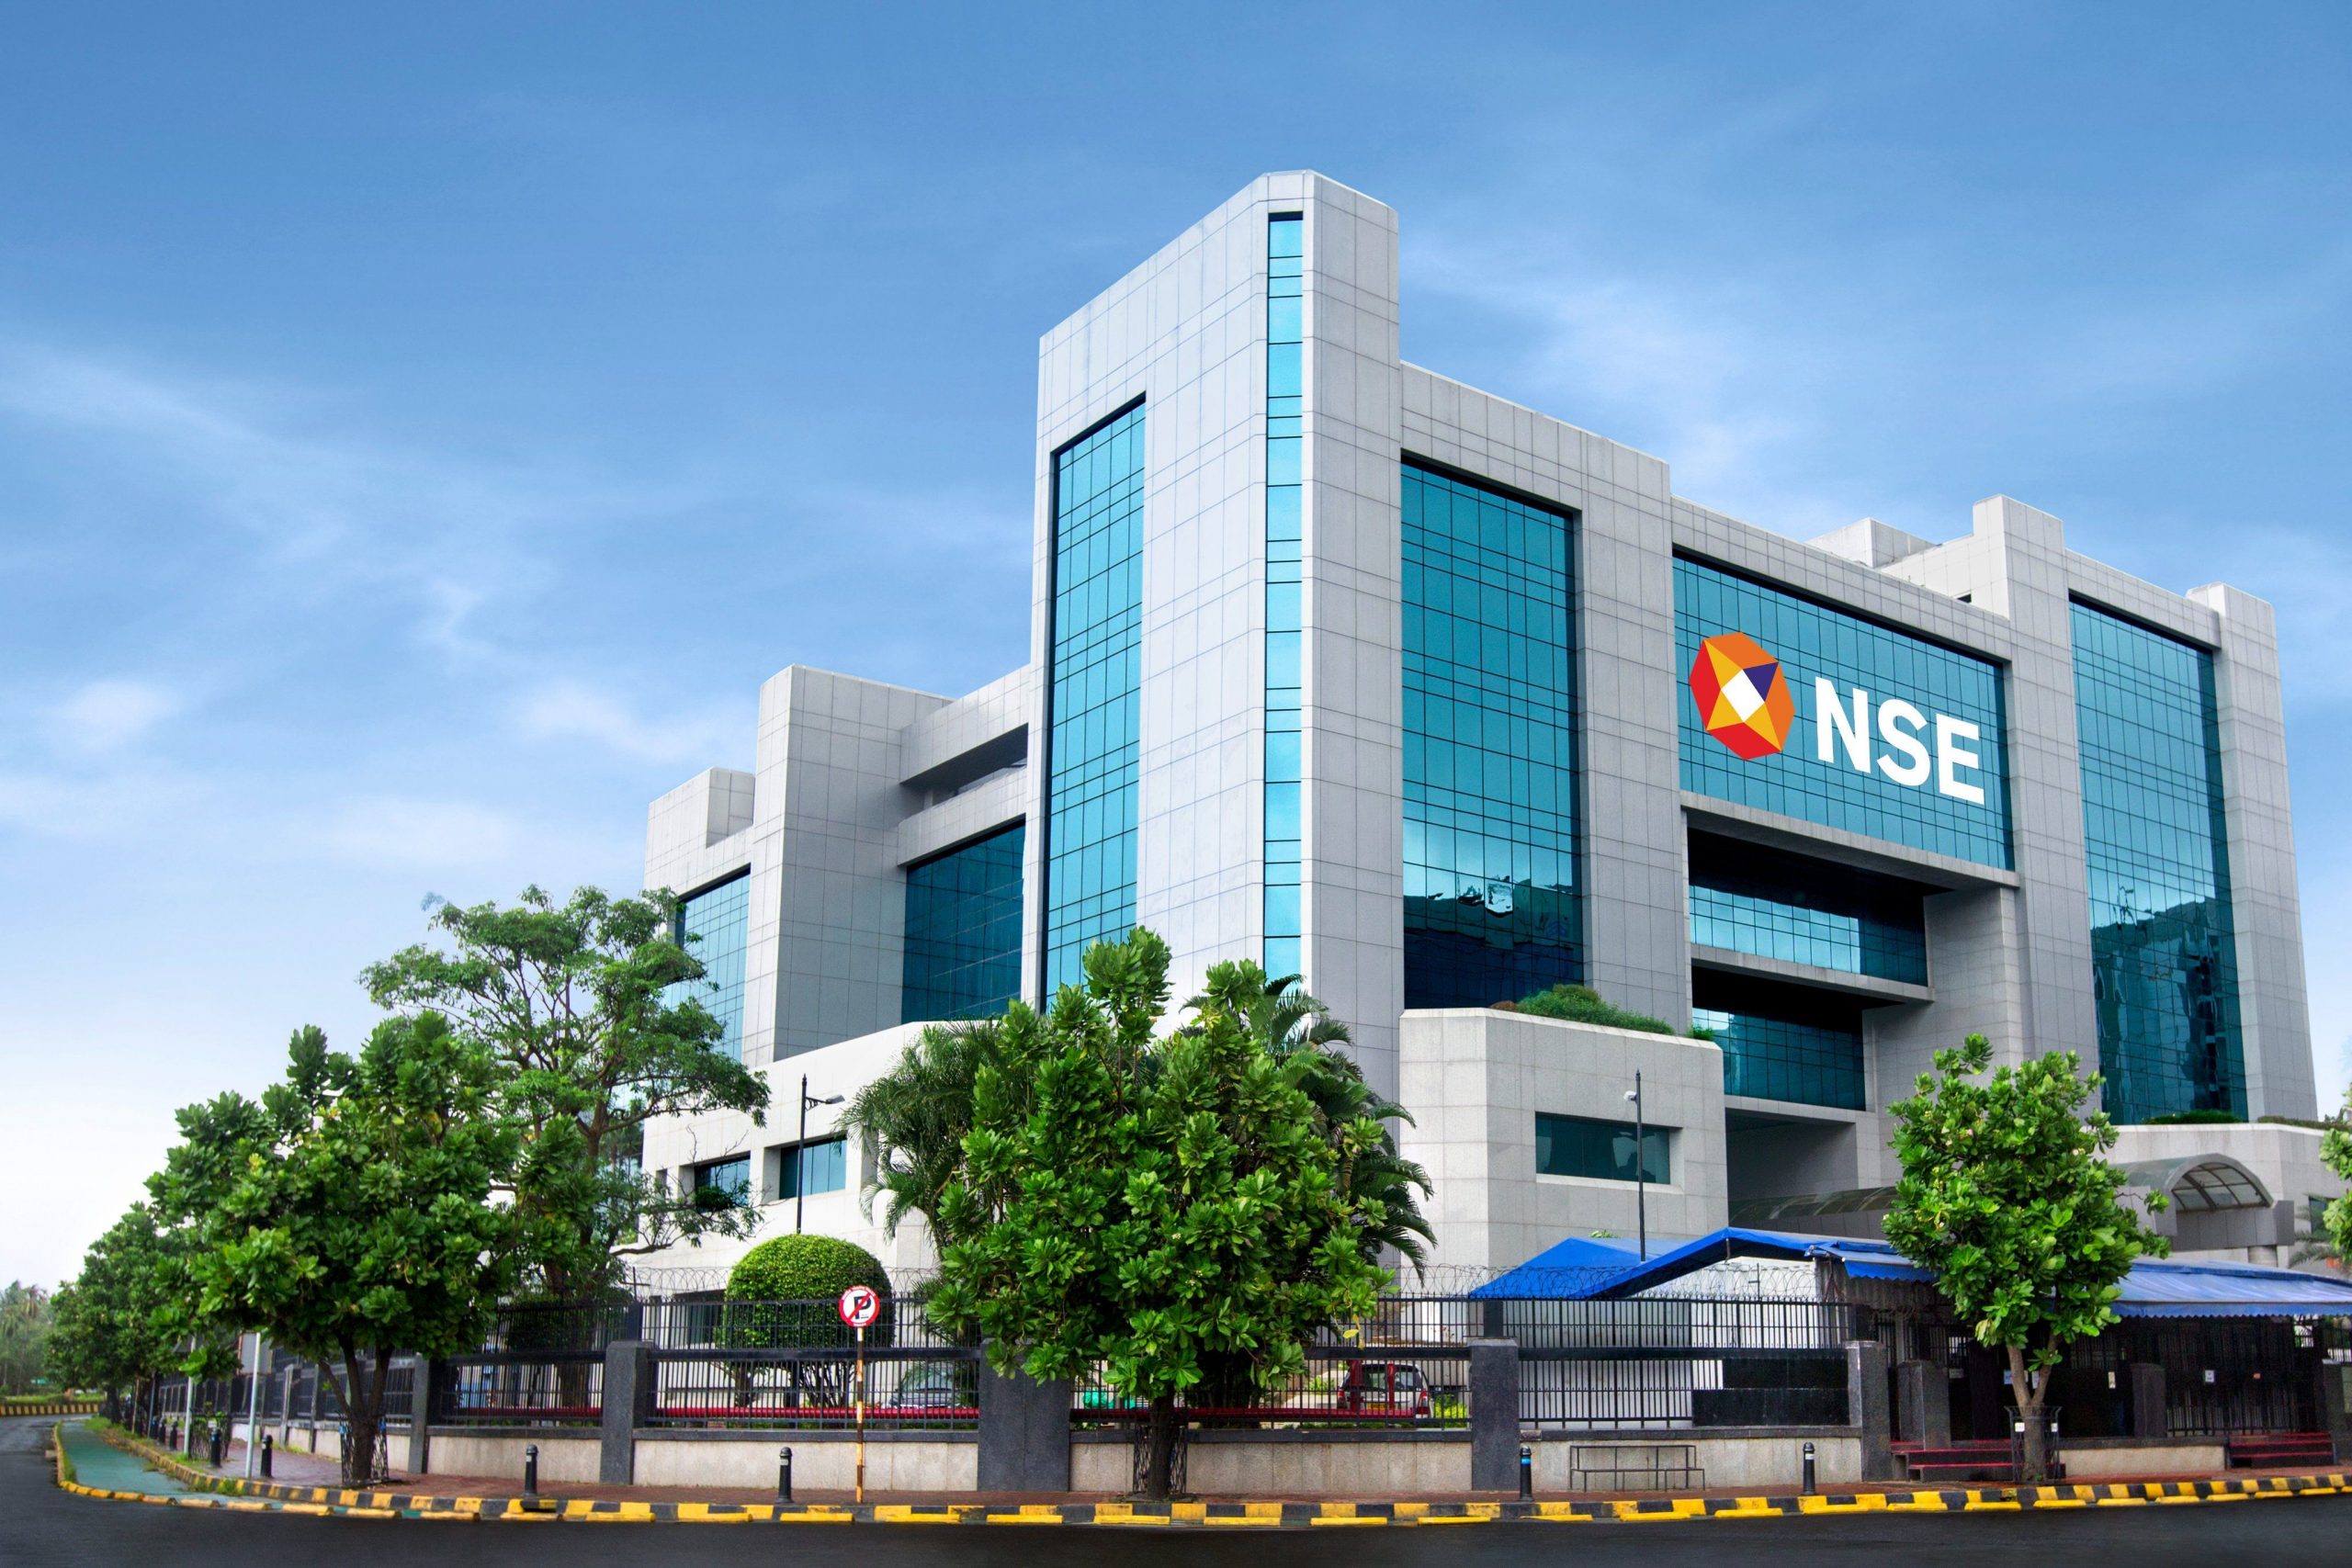 NSE F&O Ban: No stock has been put under ban on Tuesday, July 5, 2022